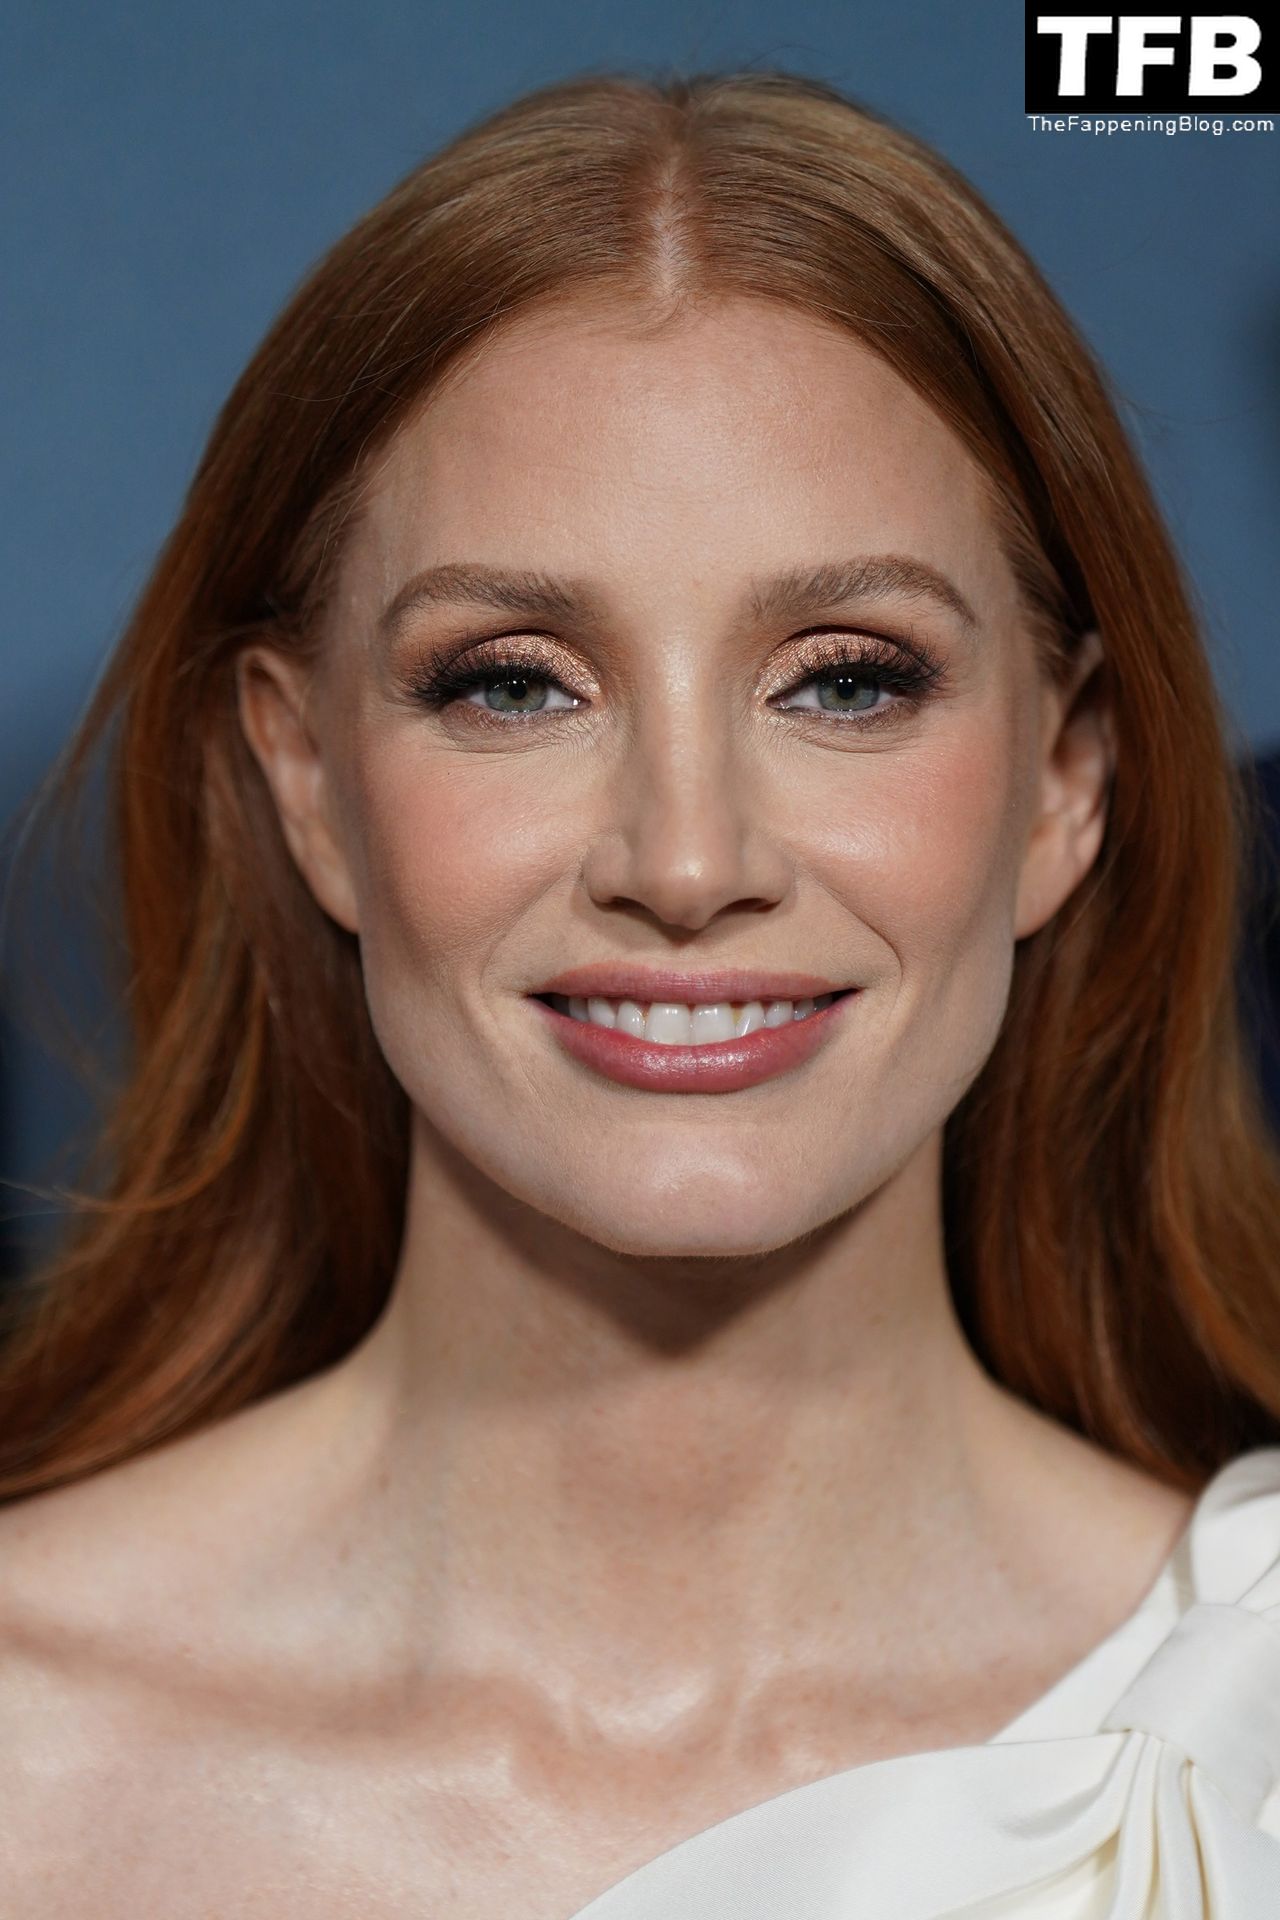 Jessica-Chastain-Sexy-The-Fappening-Blog-126-1.jpg